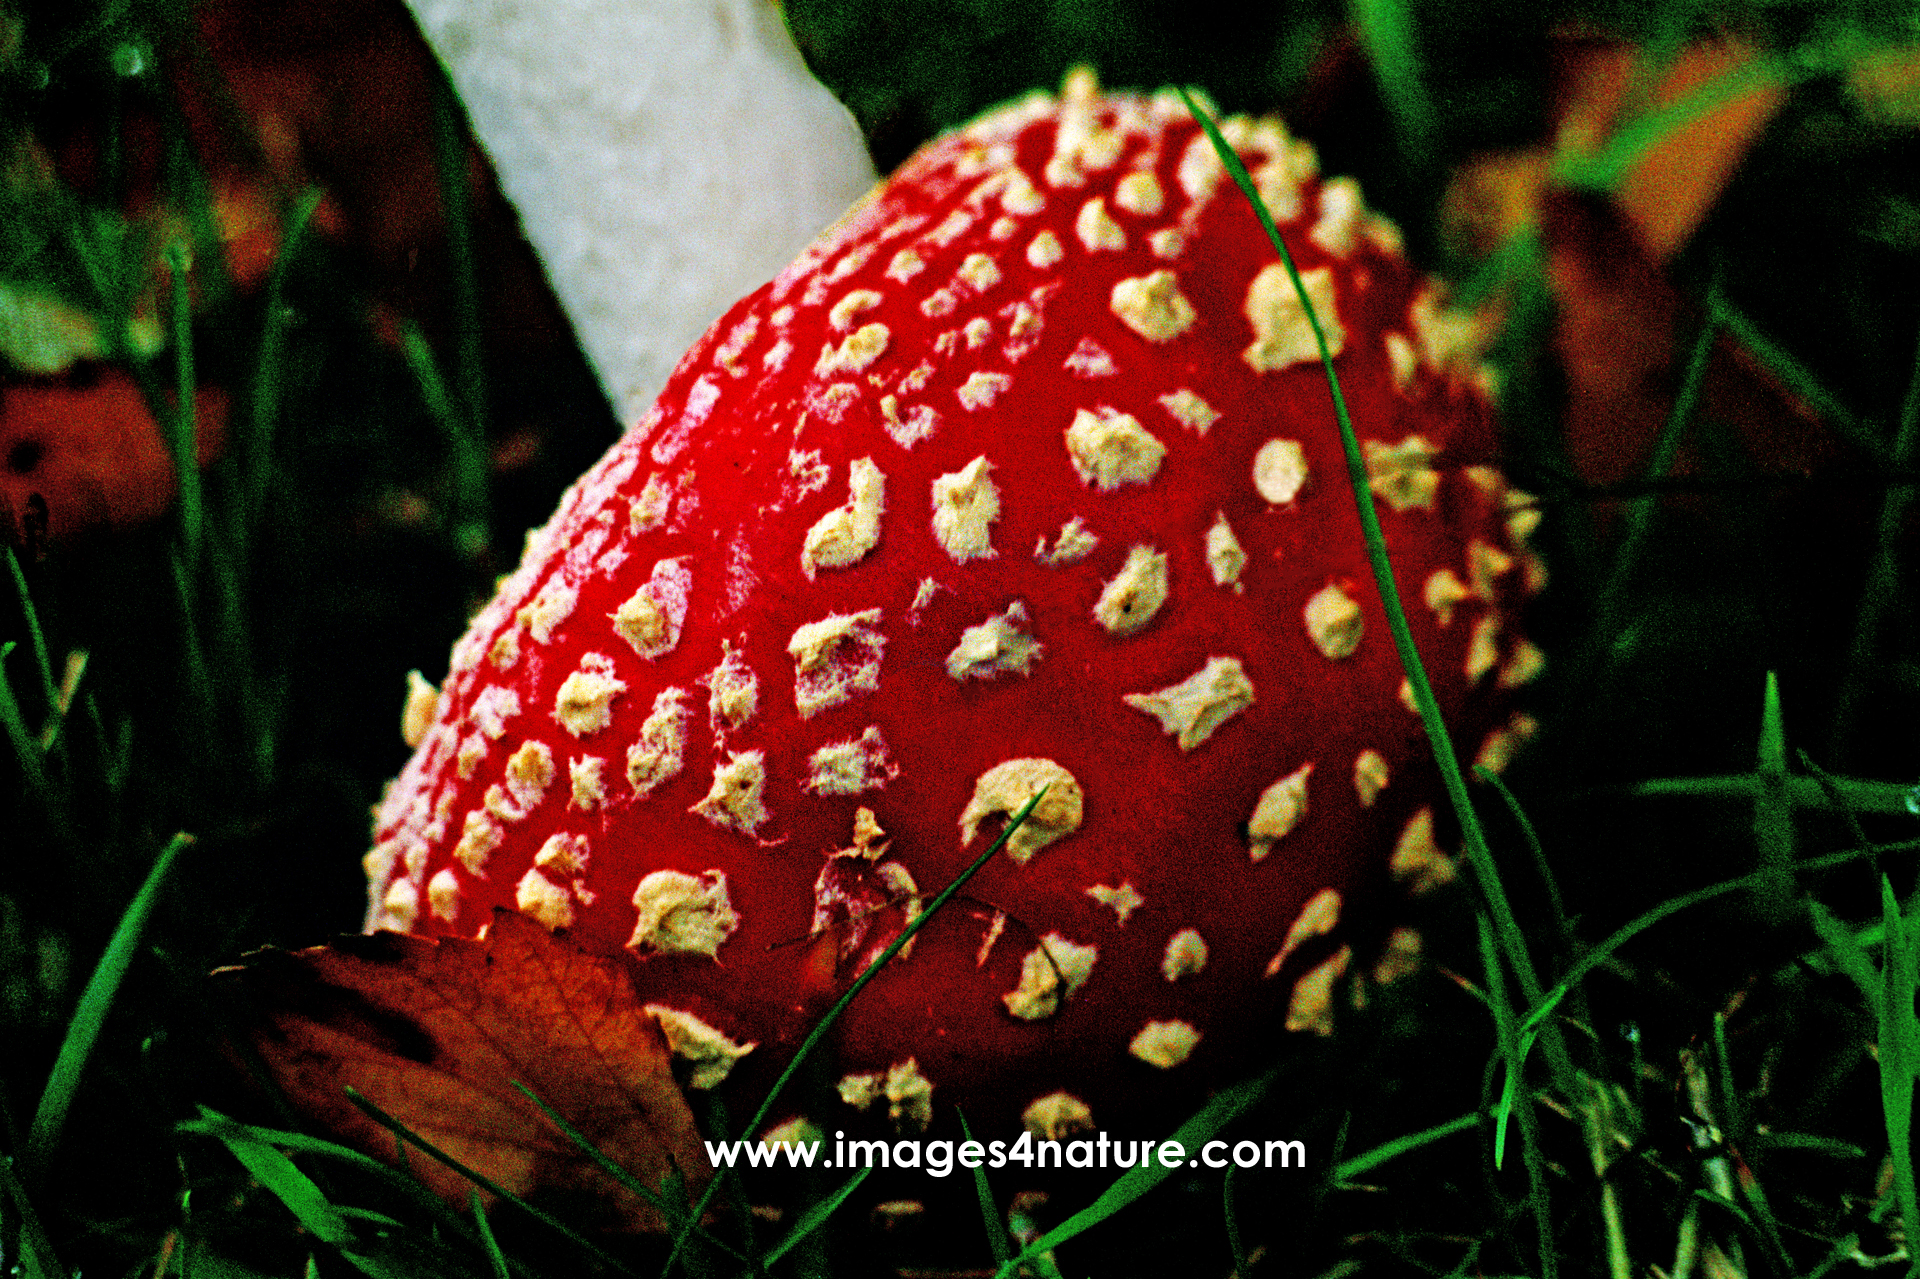 A fallen fly agaric mushroom lying on its side in the grass